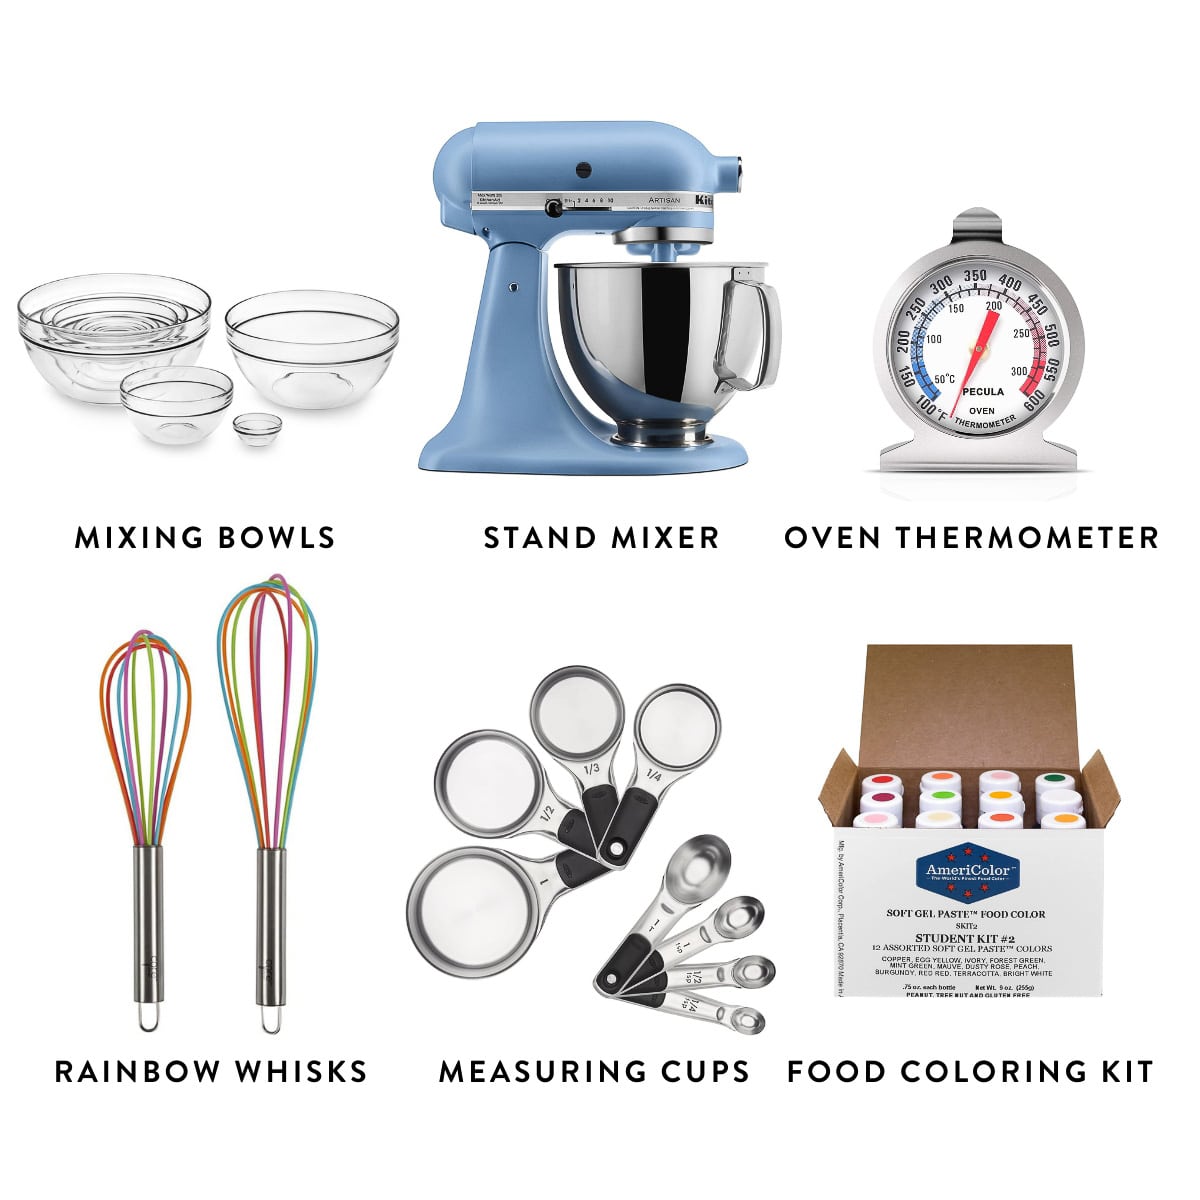 collage of graphics of different baking items including rainbow whisks, stand mixer, measuring cups.